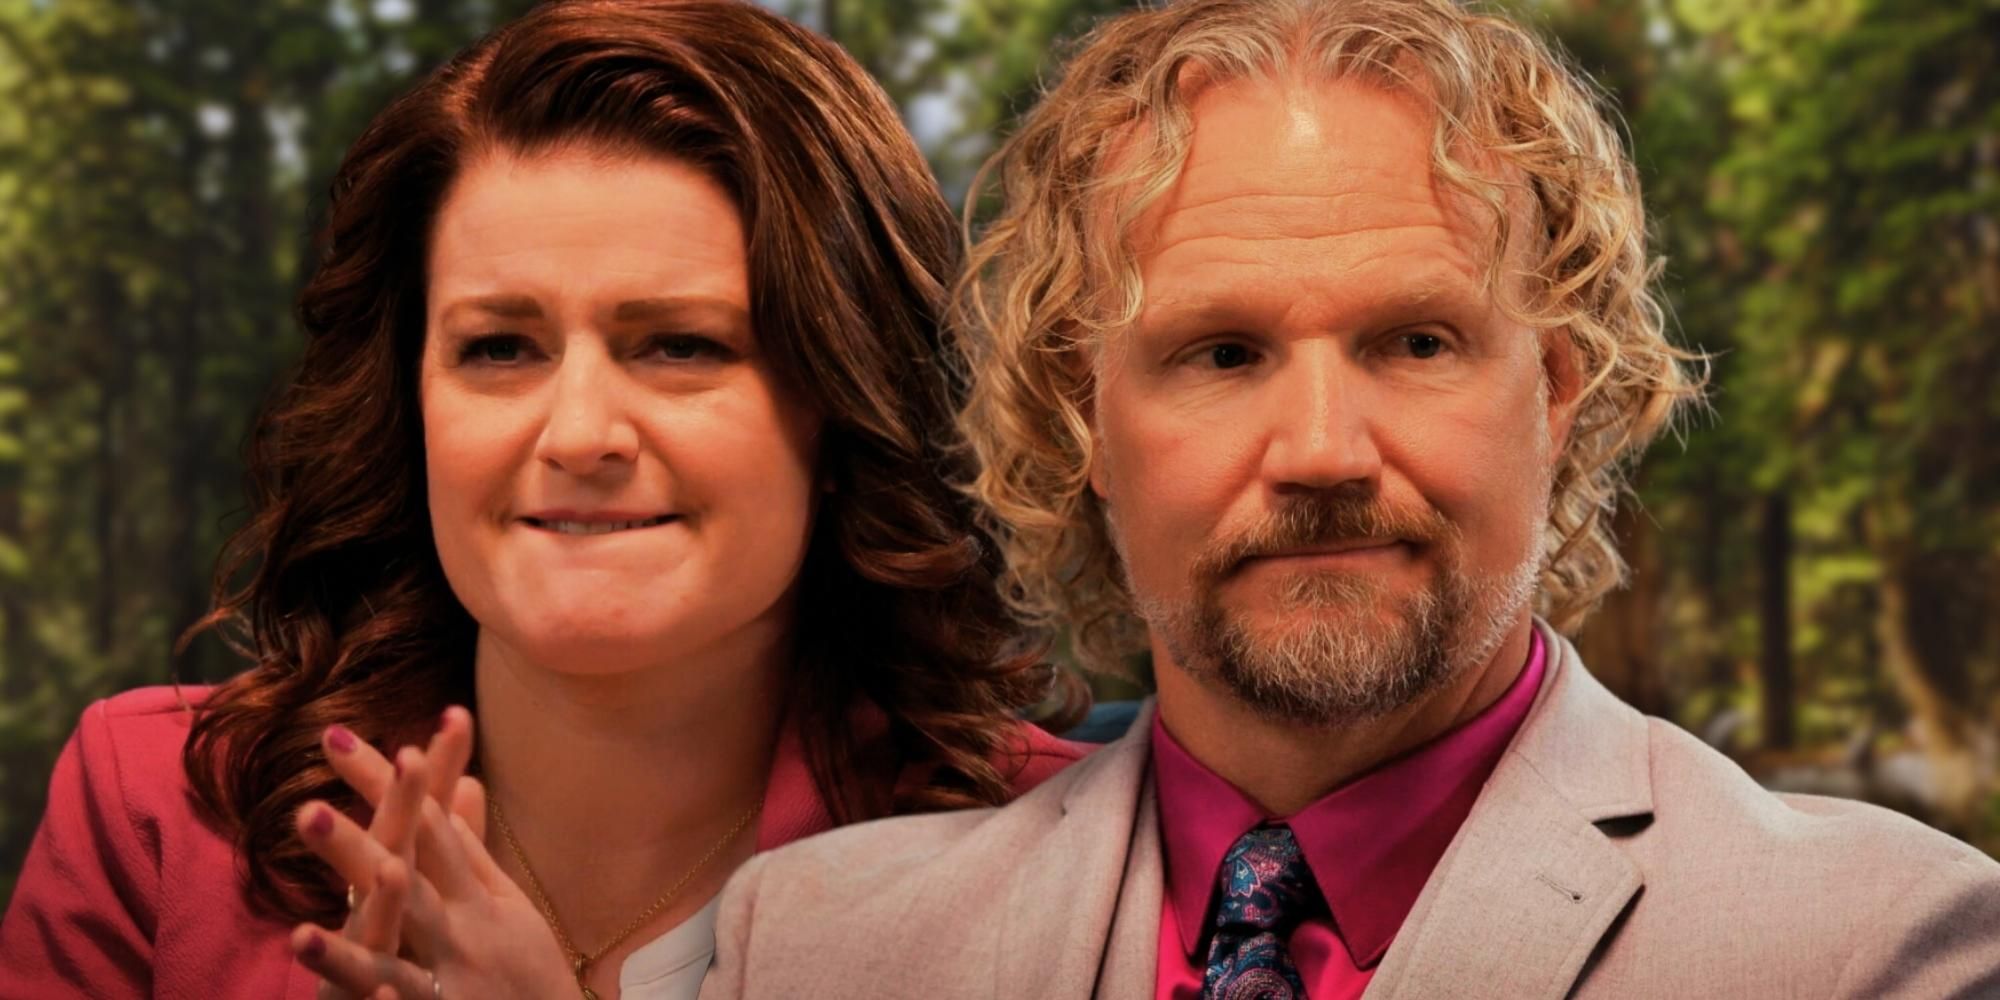 Sister Wives - Robyn Could Be Lying About Wanting Monogamy With Kody